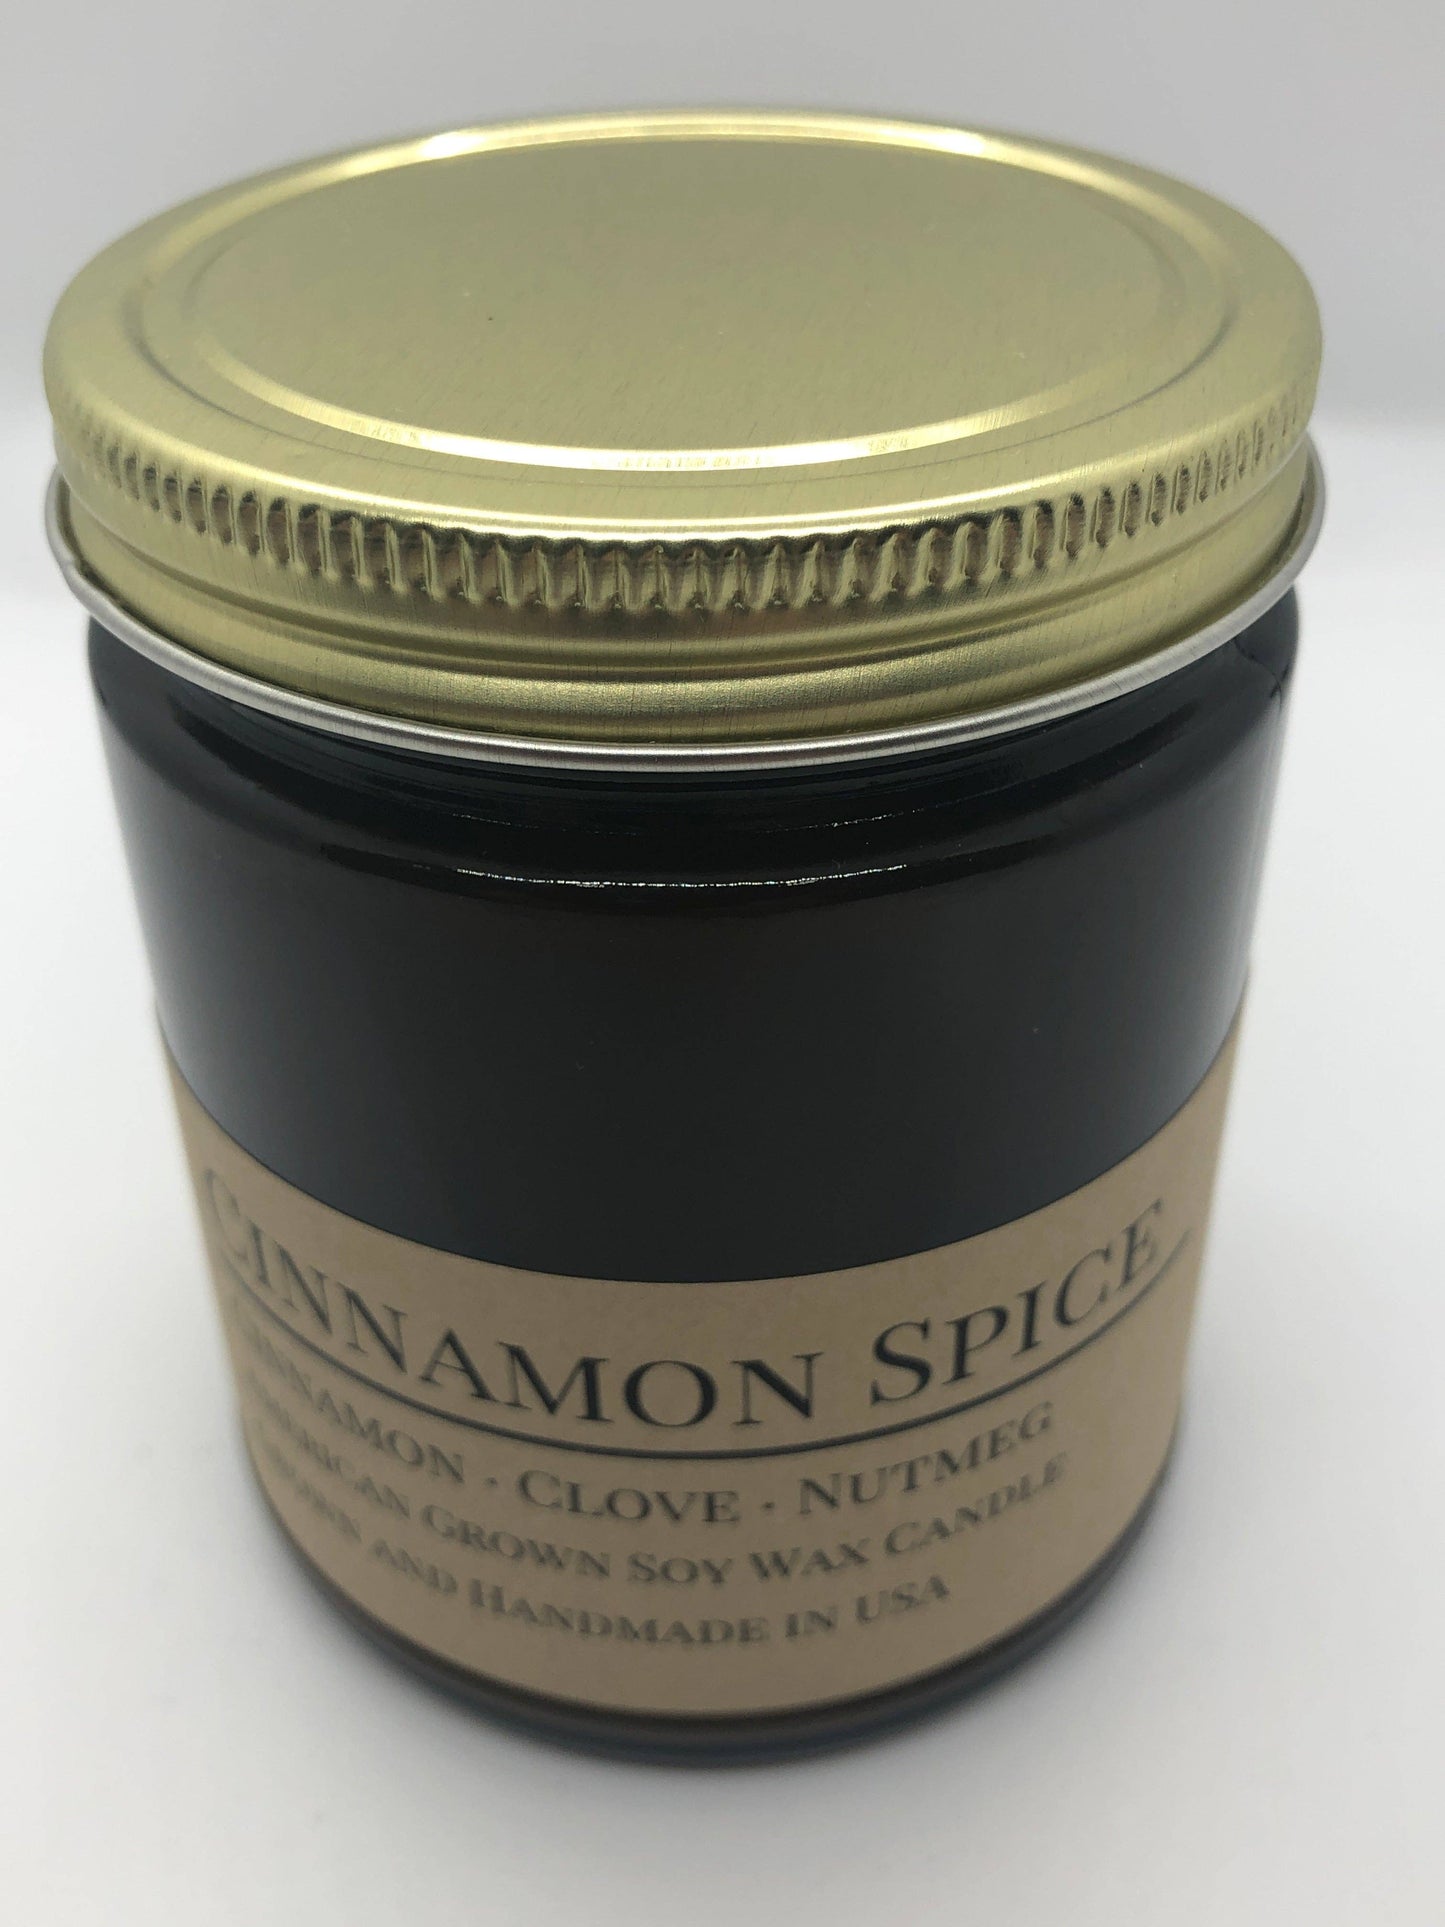 Cinnamon Spice Soy Candle | 9 oz Amber Apothecary Jar